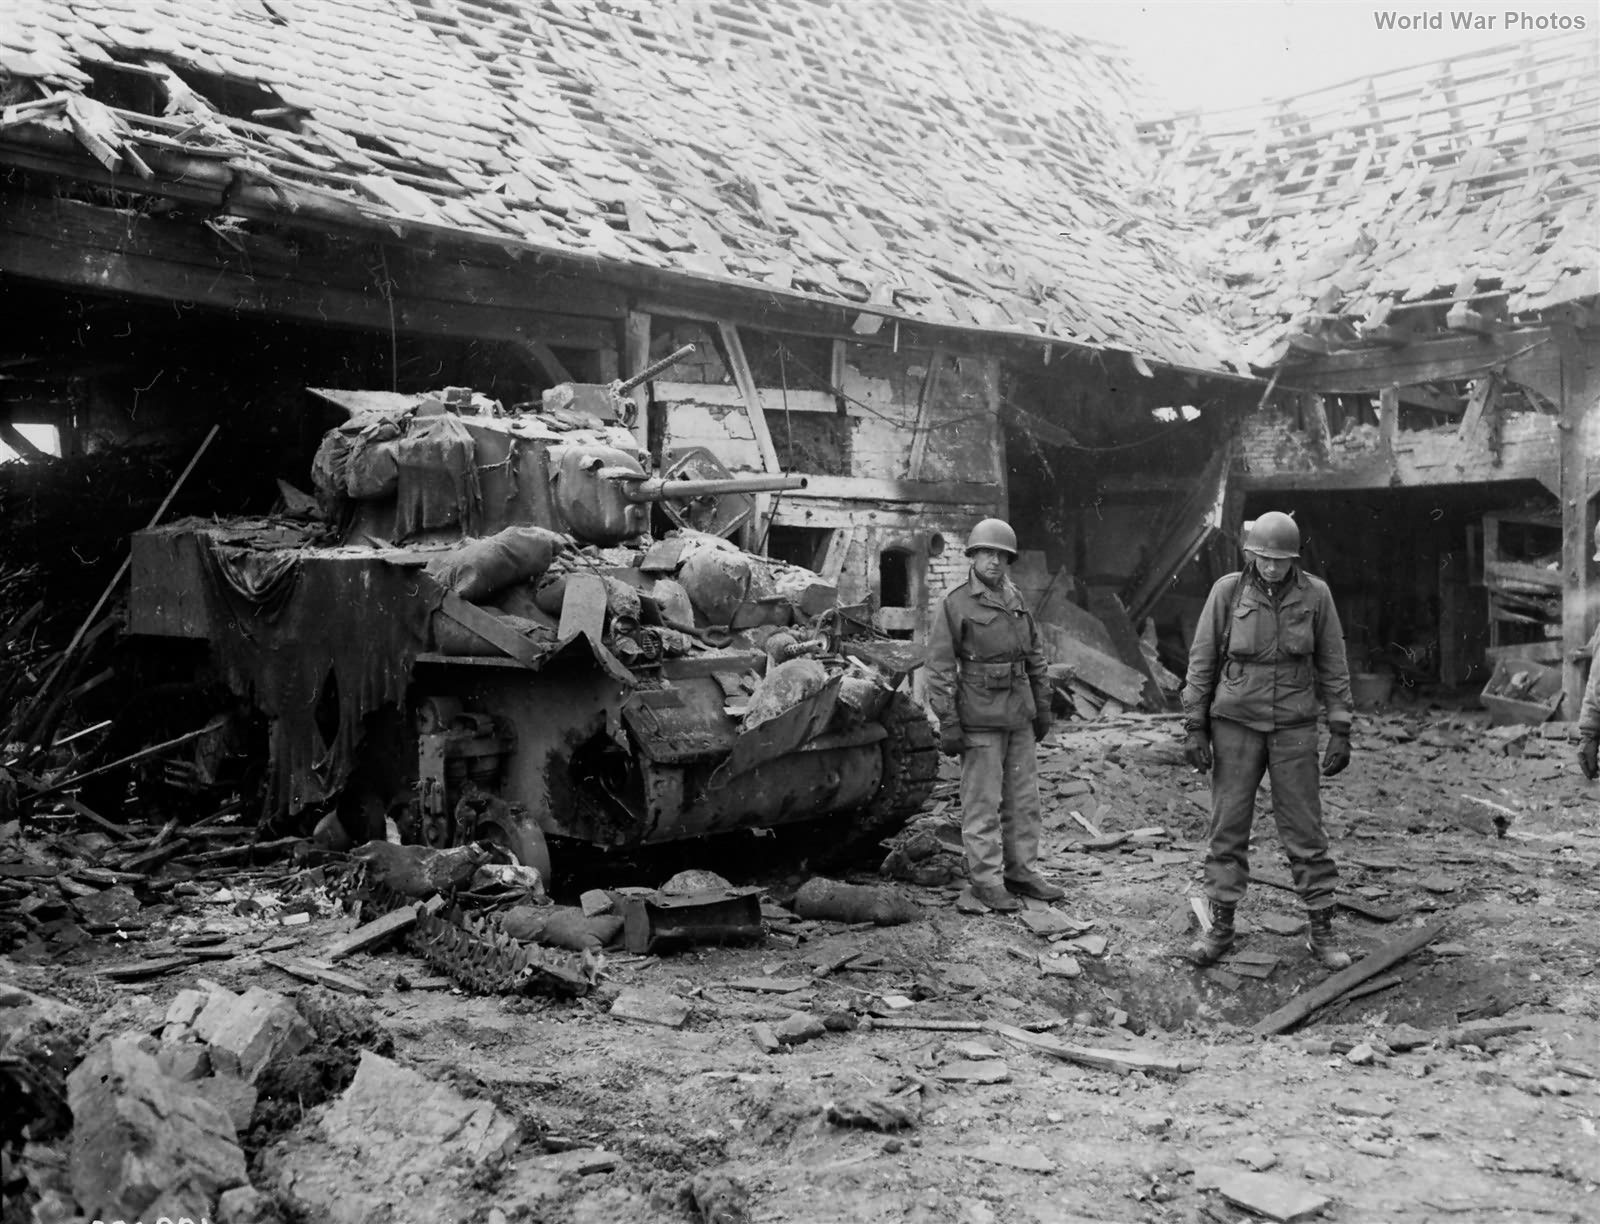 M5 from 14th Armored Division damaged by German air attack